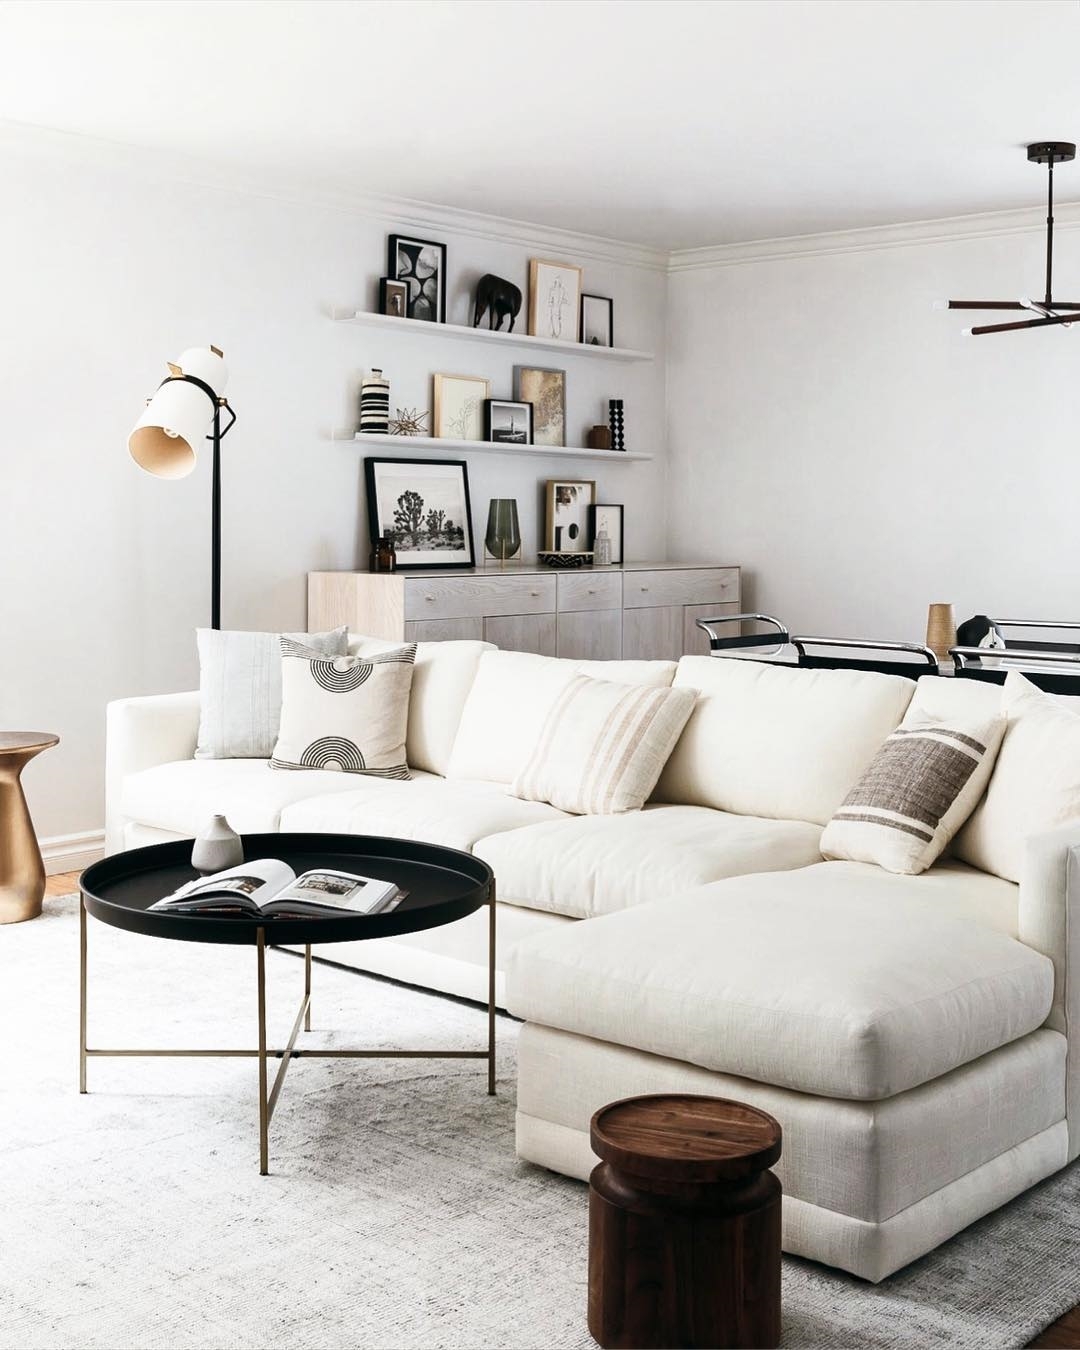 Living designed in Minimalist style with a tan couch and white walls and blush pillows. Photo by Instagram user @mi_property_solutions